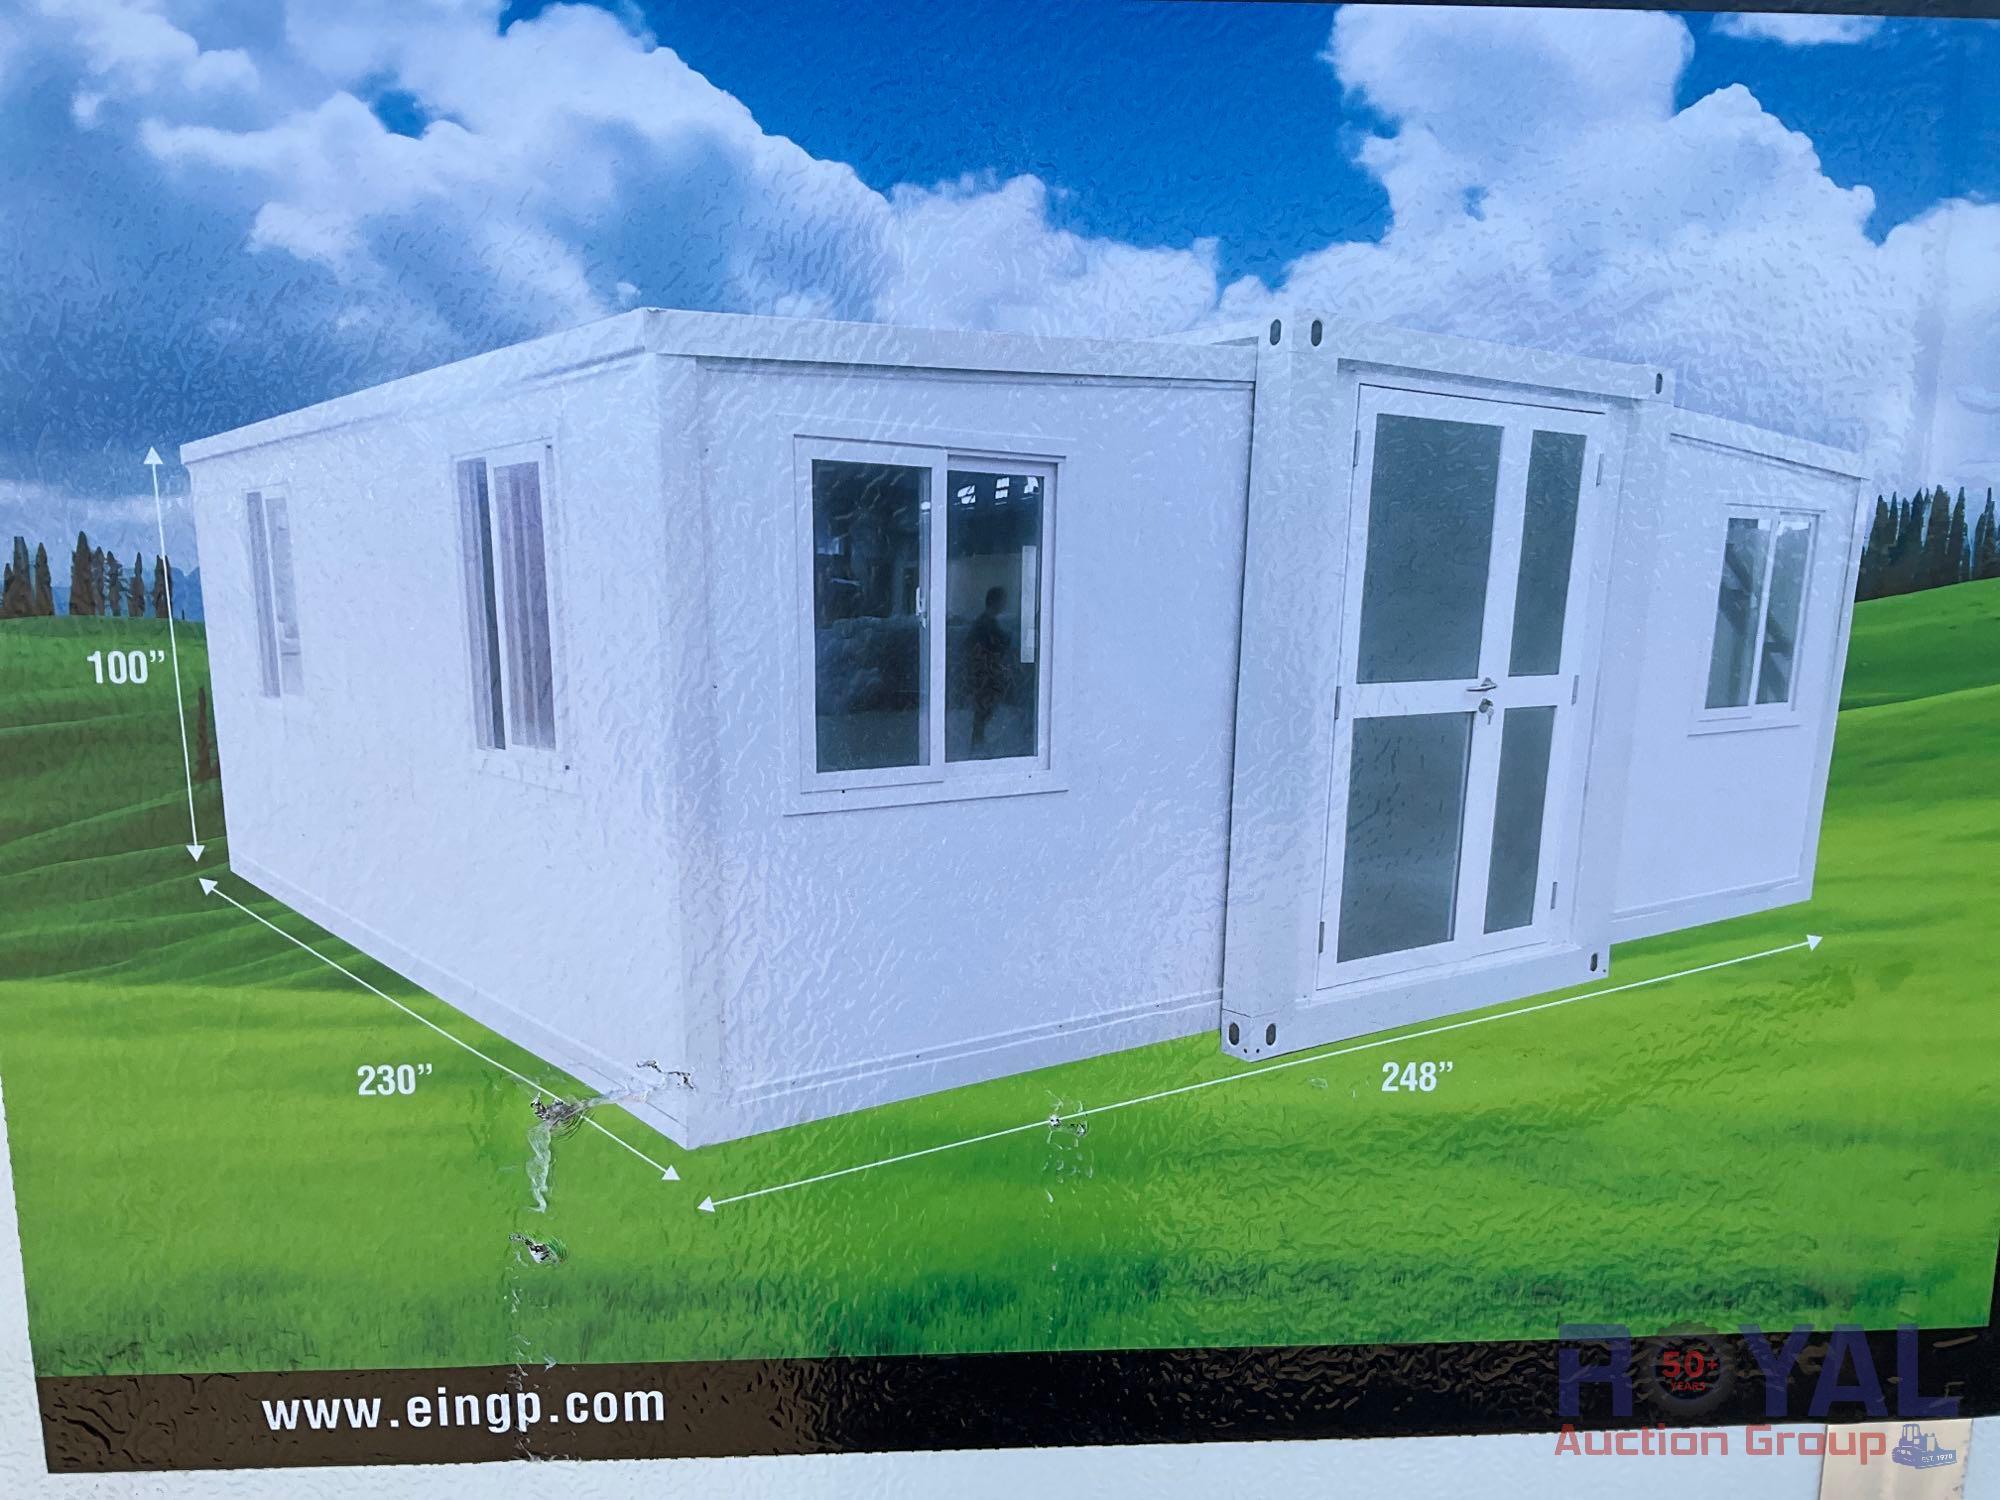 2024 400 Sqft Expandable Container Modular House